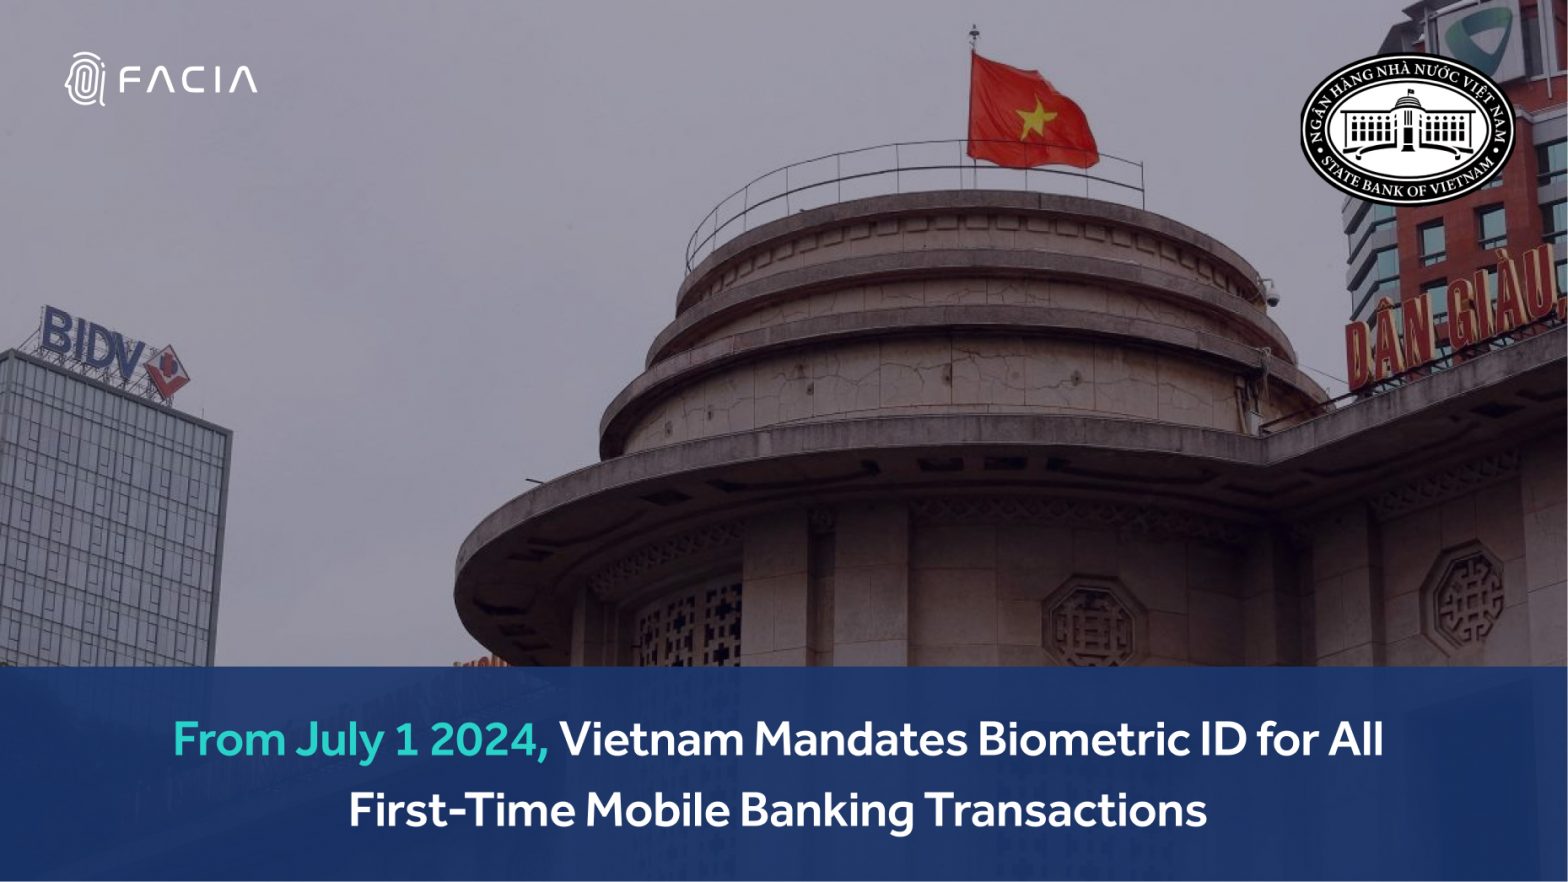 From July 1 2024, Vietnam Mandates Biometrics ID for All First-Time